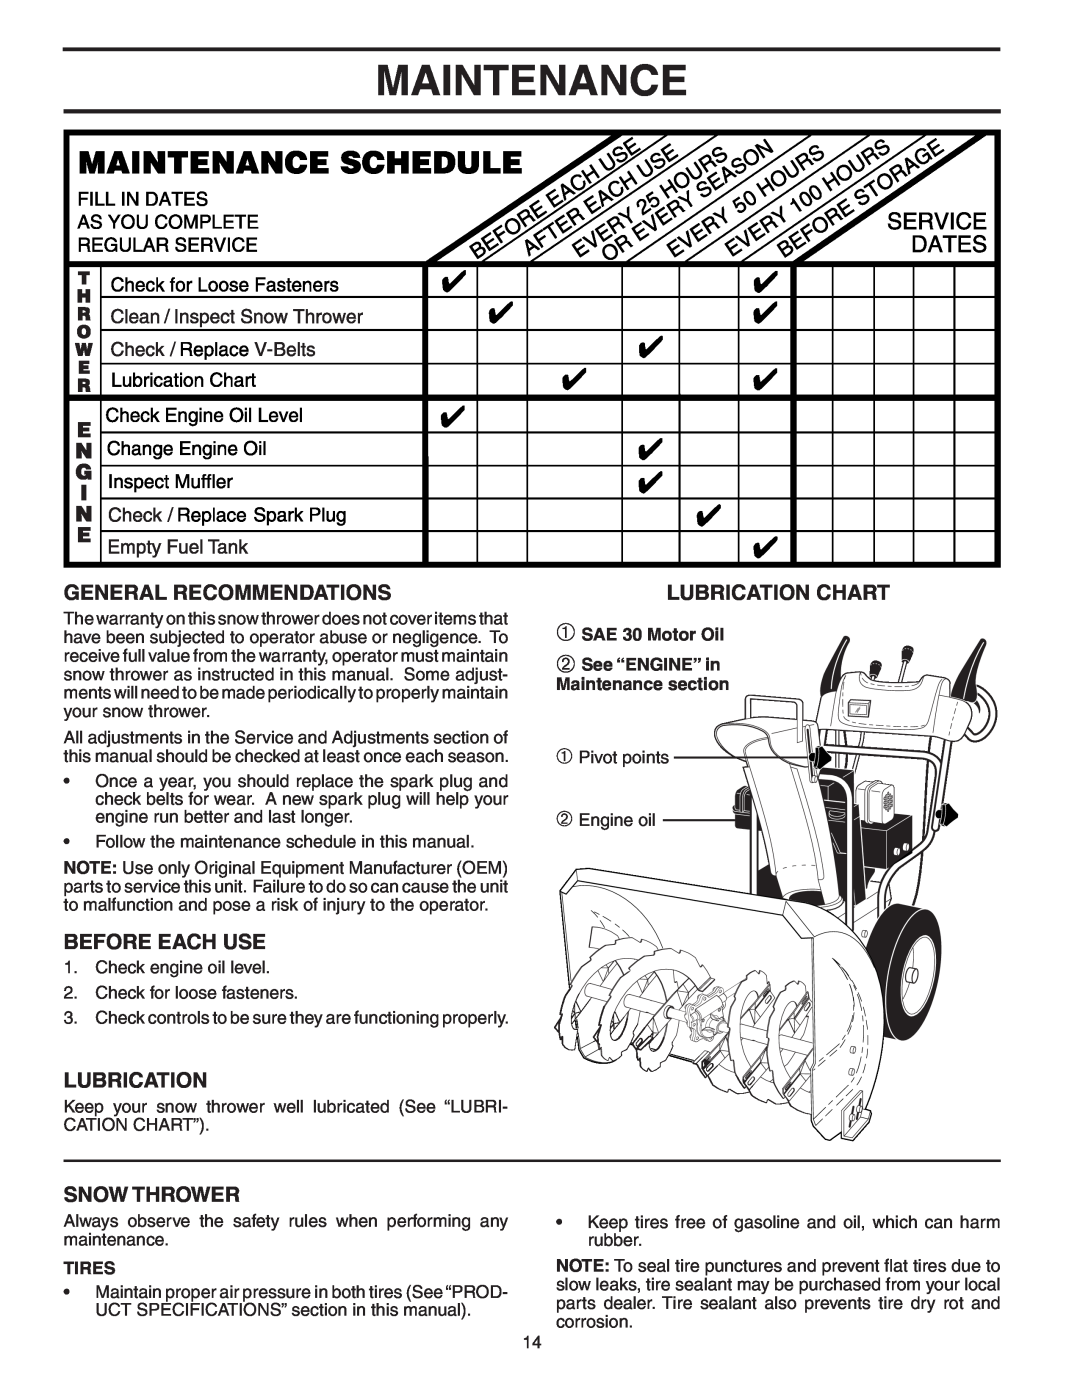 Poulan 187887 Maintenance, General Recommendations, Before Each Use, Snow Thrower, Lubrication Chart, Tires 